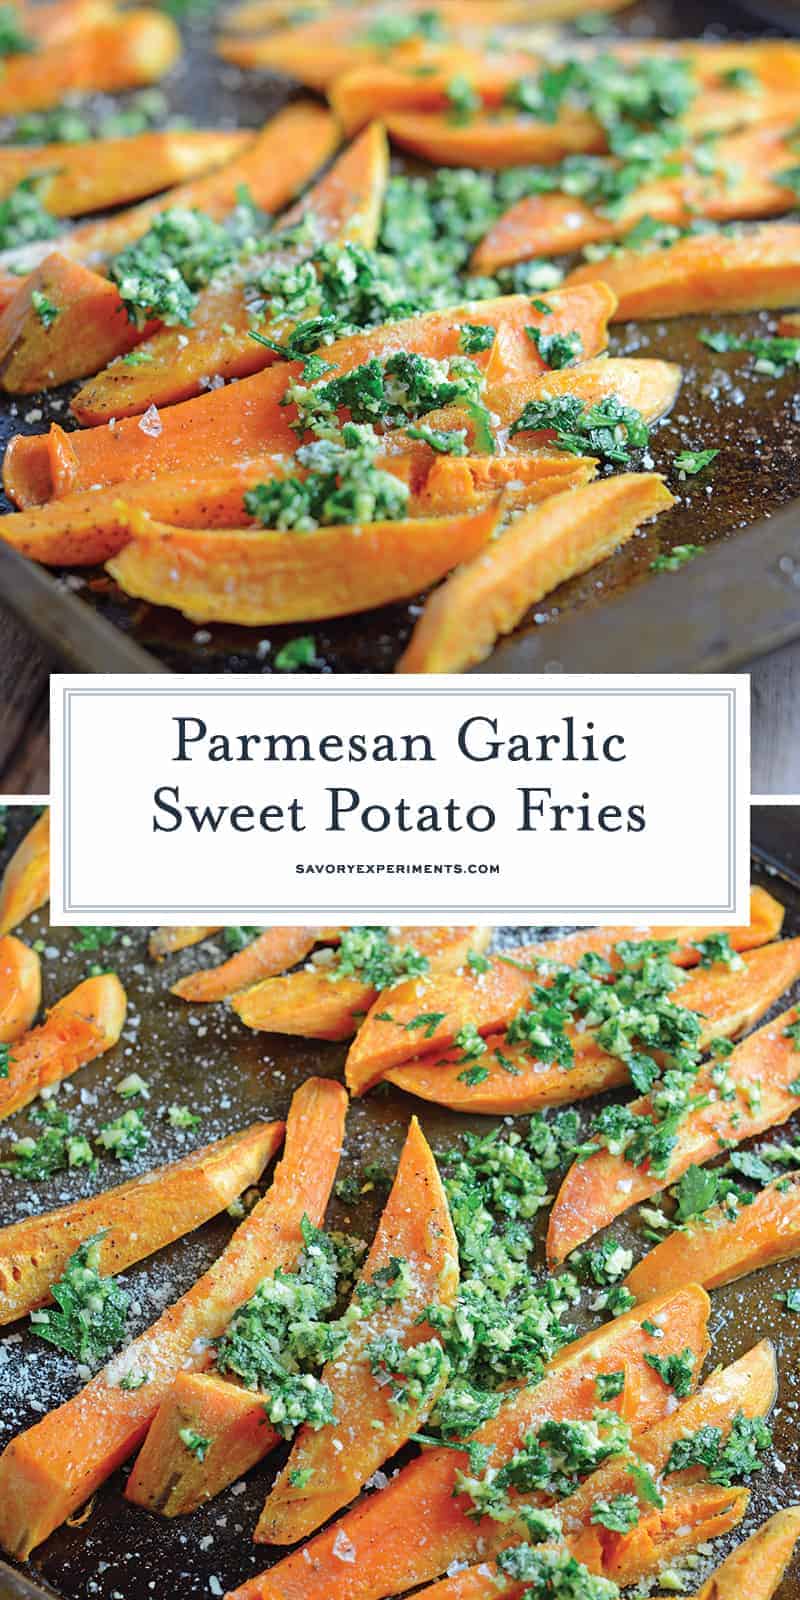 Garlic Parmesan Baked Sweet Potato Fries will jazz up your dinner with lightly tossed herbs, cheese and tender sweet potatoes! #sweetpotatofries #bakedsweetpotatofries #sweetpotatorecipes www.savoryexperiments.com